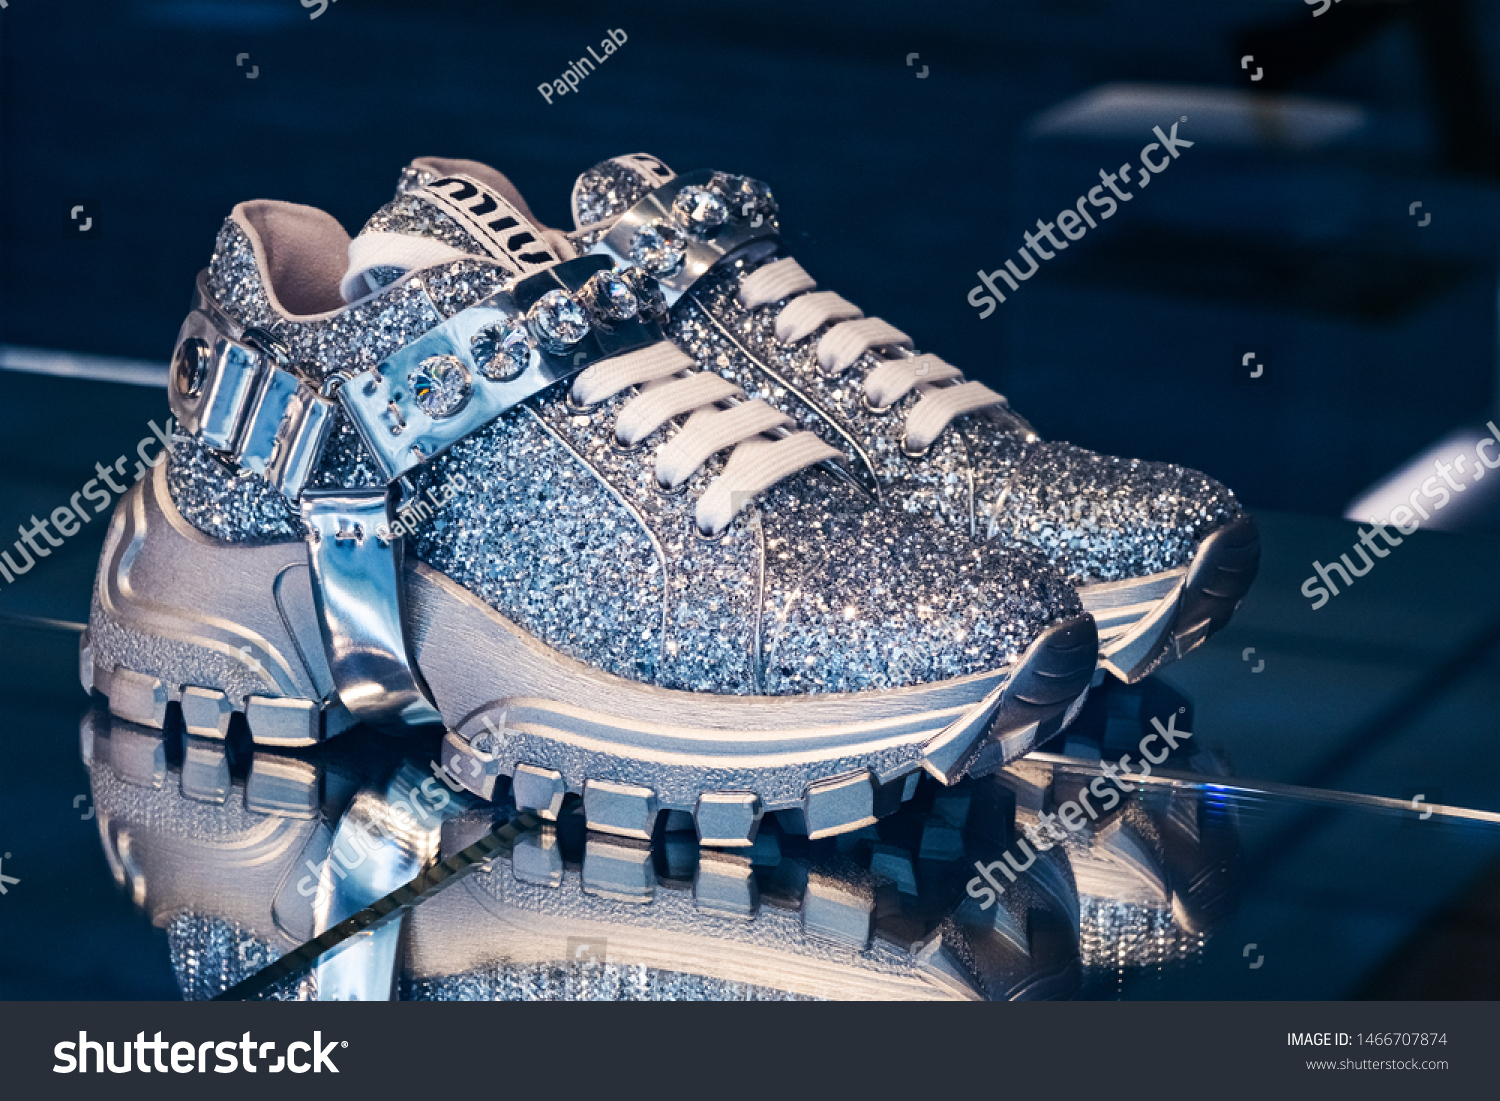 silver sneakers 2019